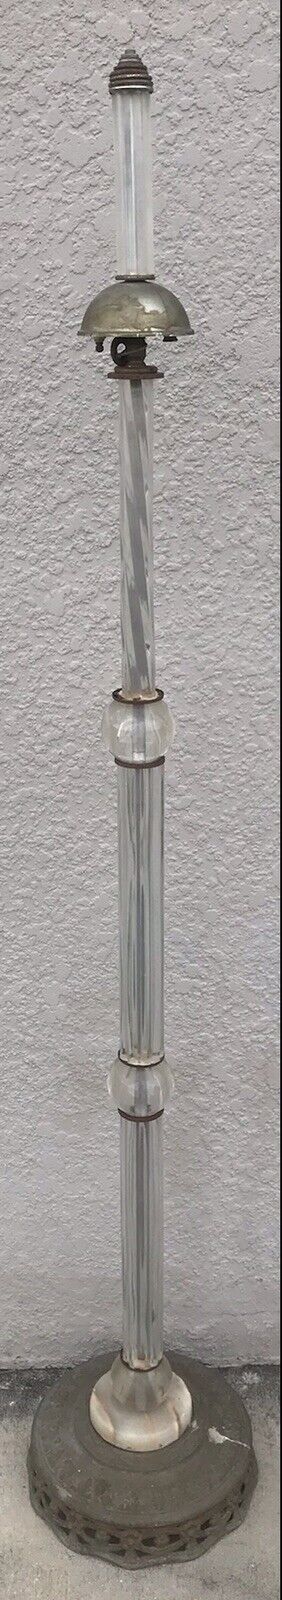 UNIQUE LARGE BAMBOO GLASS-CAST METAL-MARBLE FLOOR LAMP.VERY TALL